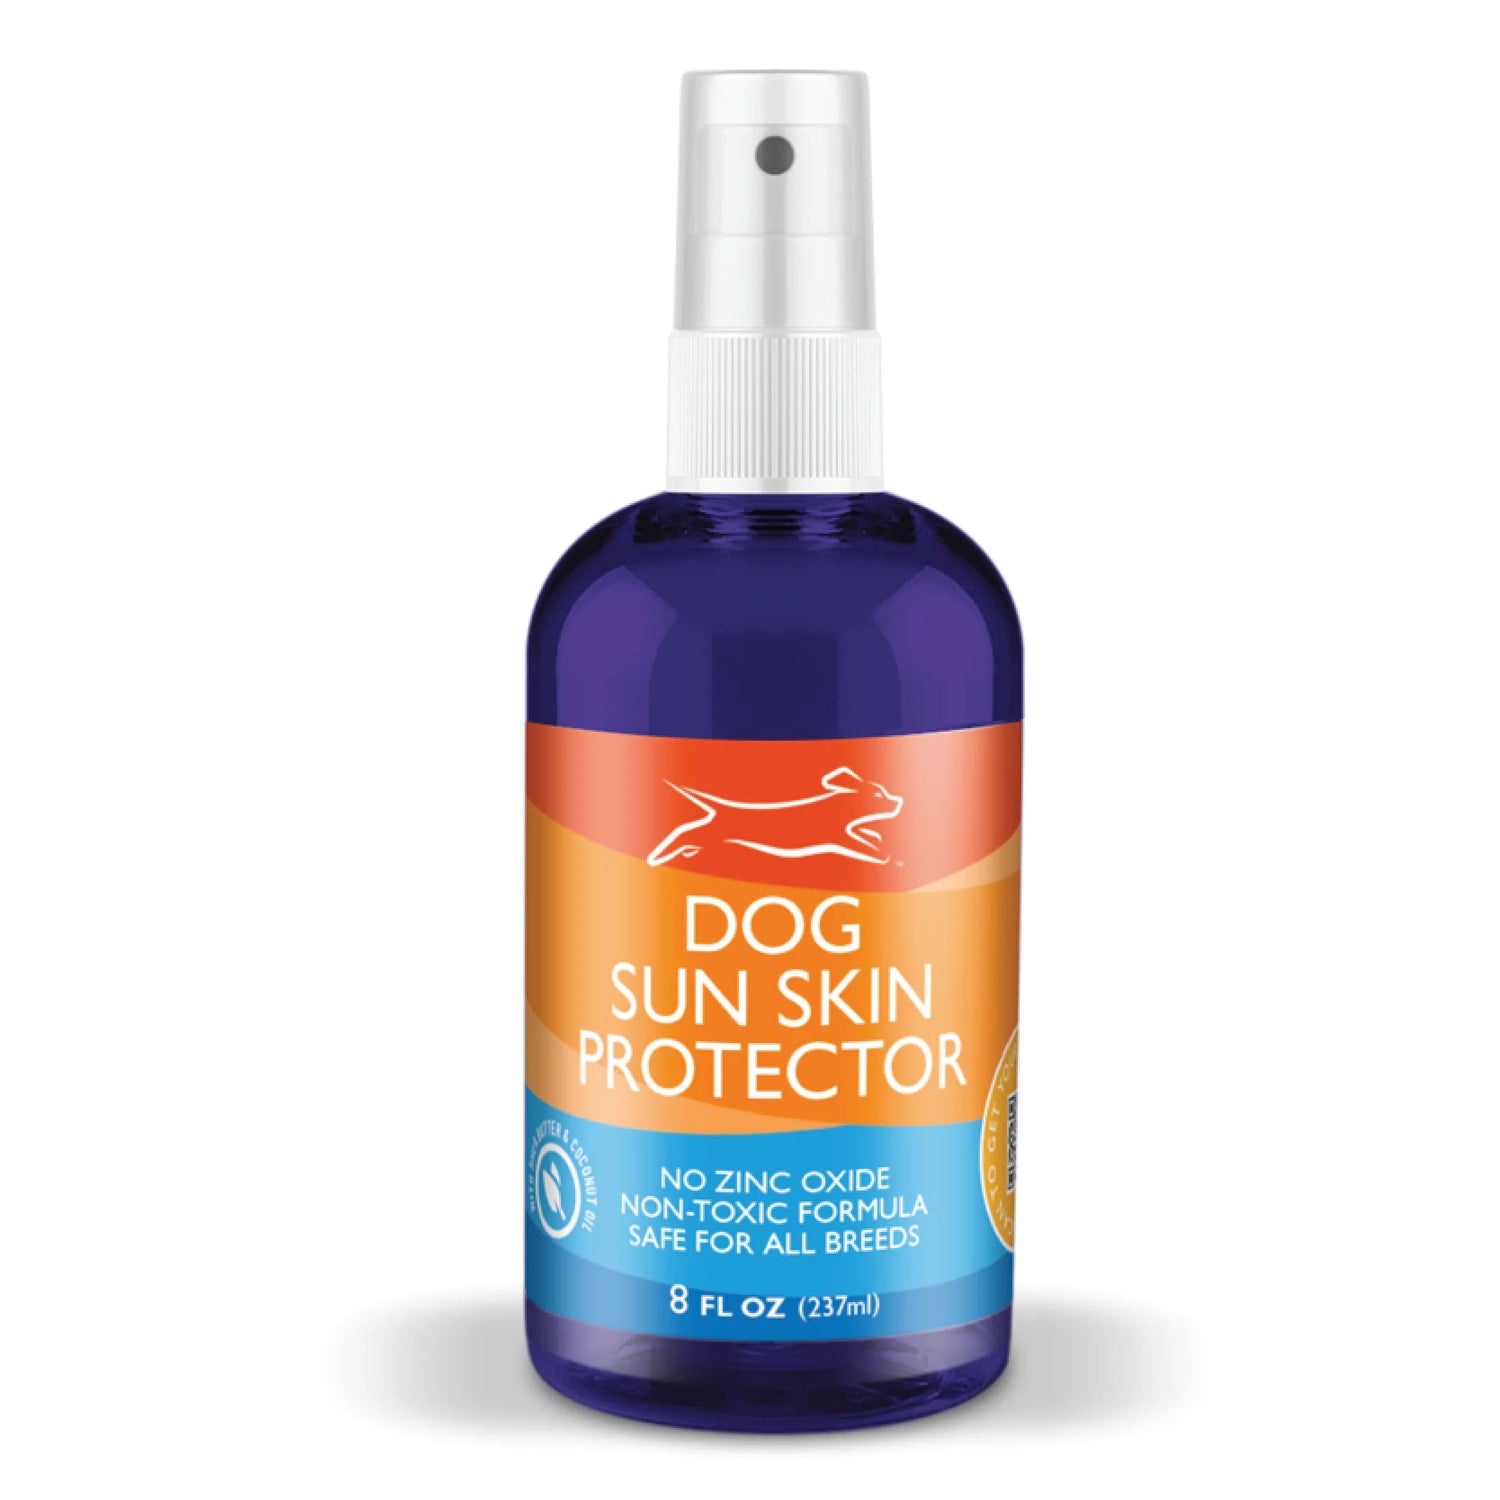 Emmy'S Best Pet Products Dog Sun Protector, for Dogs and Puppies of All Breeds, 8 Fluid Ounce Bottle